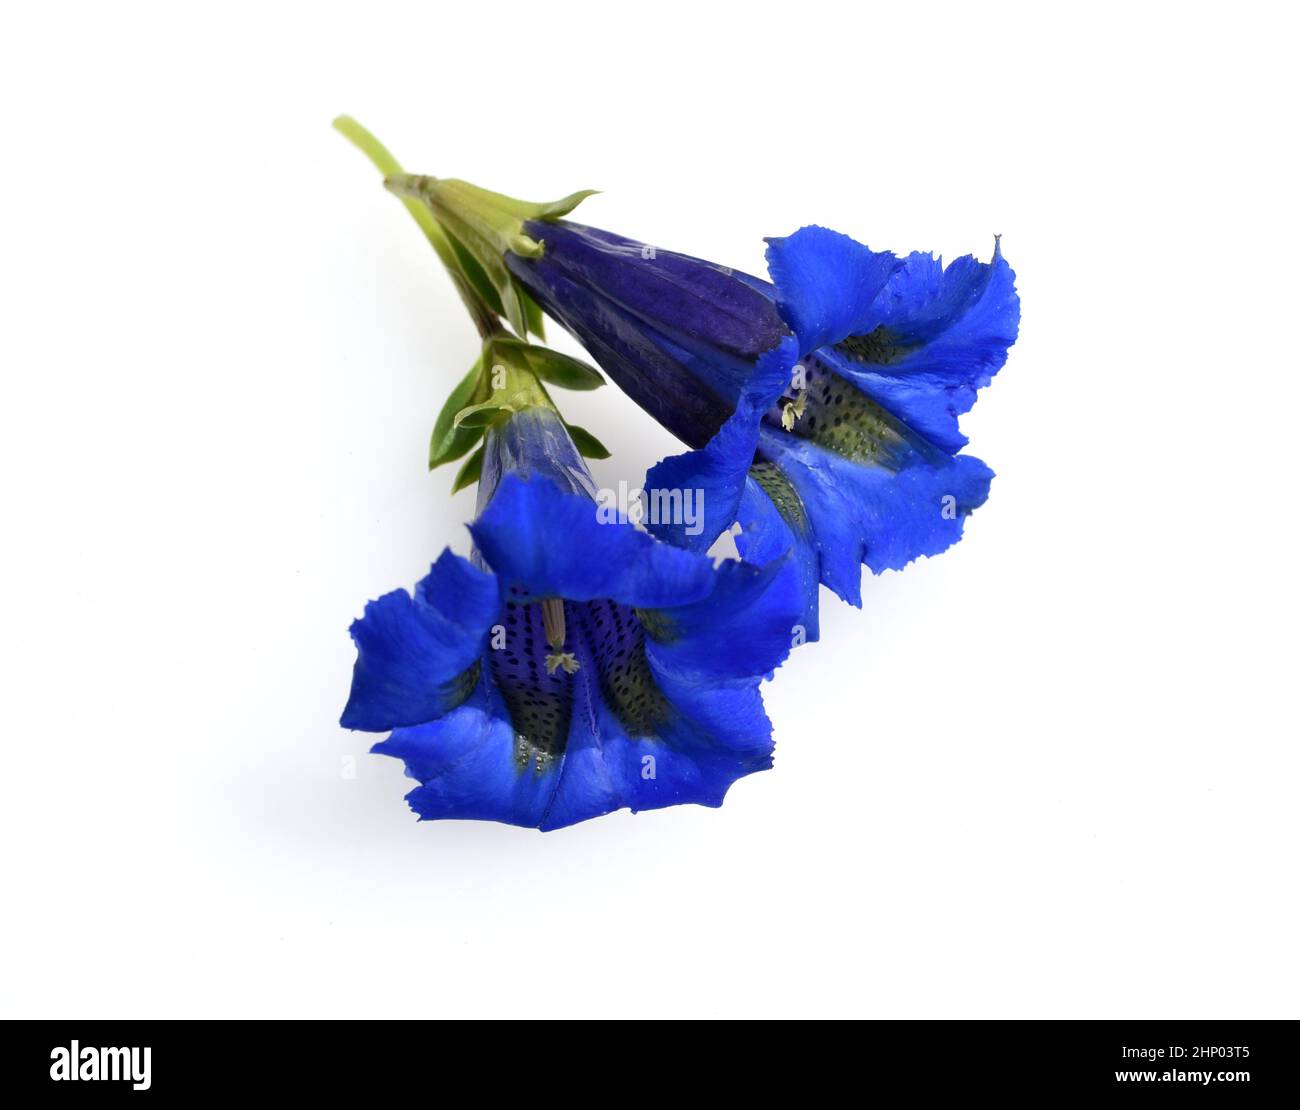 Gentian, Gentiana acaulis, the silicate gentian comes from the mountains of Central Europe. It is a deep blue flowering perennial that should not be m Stock Photo